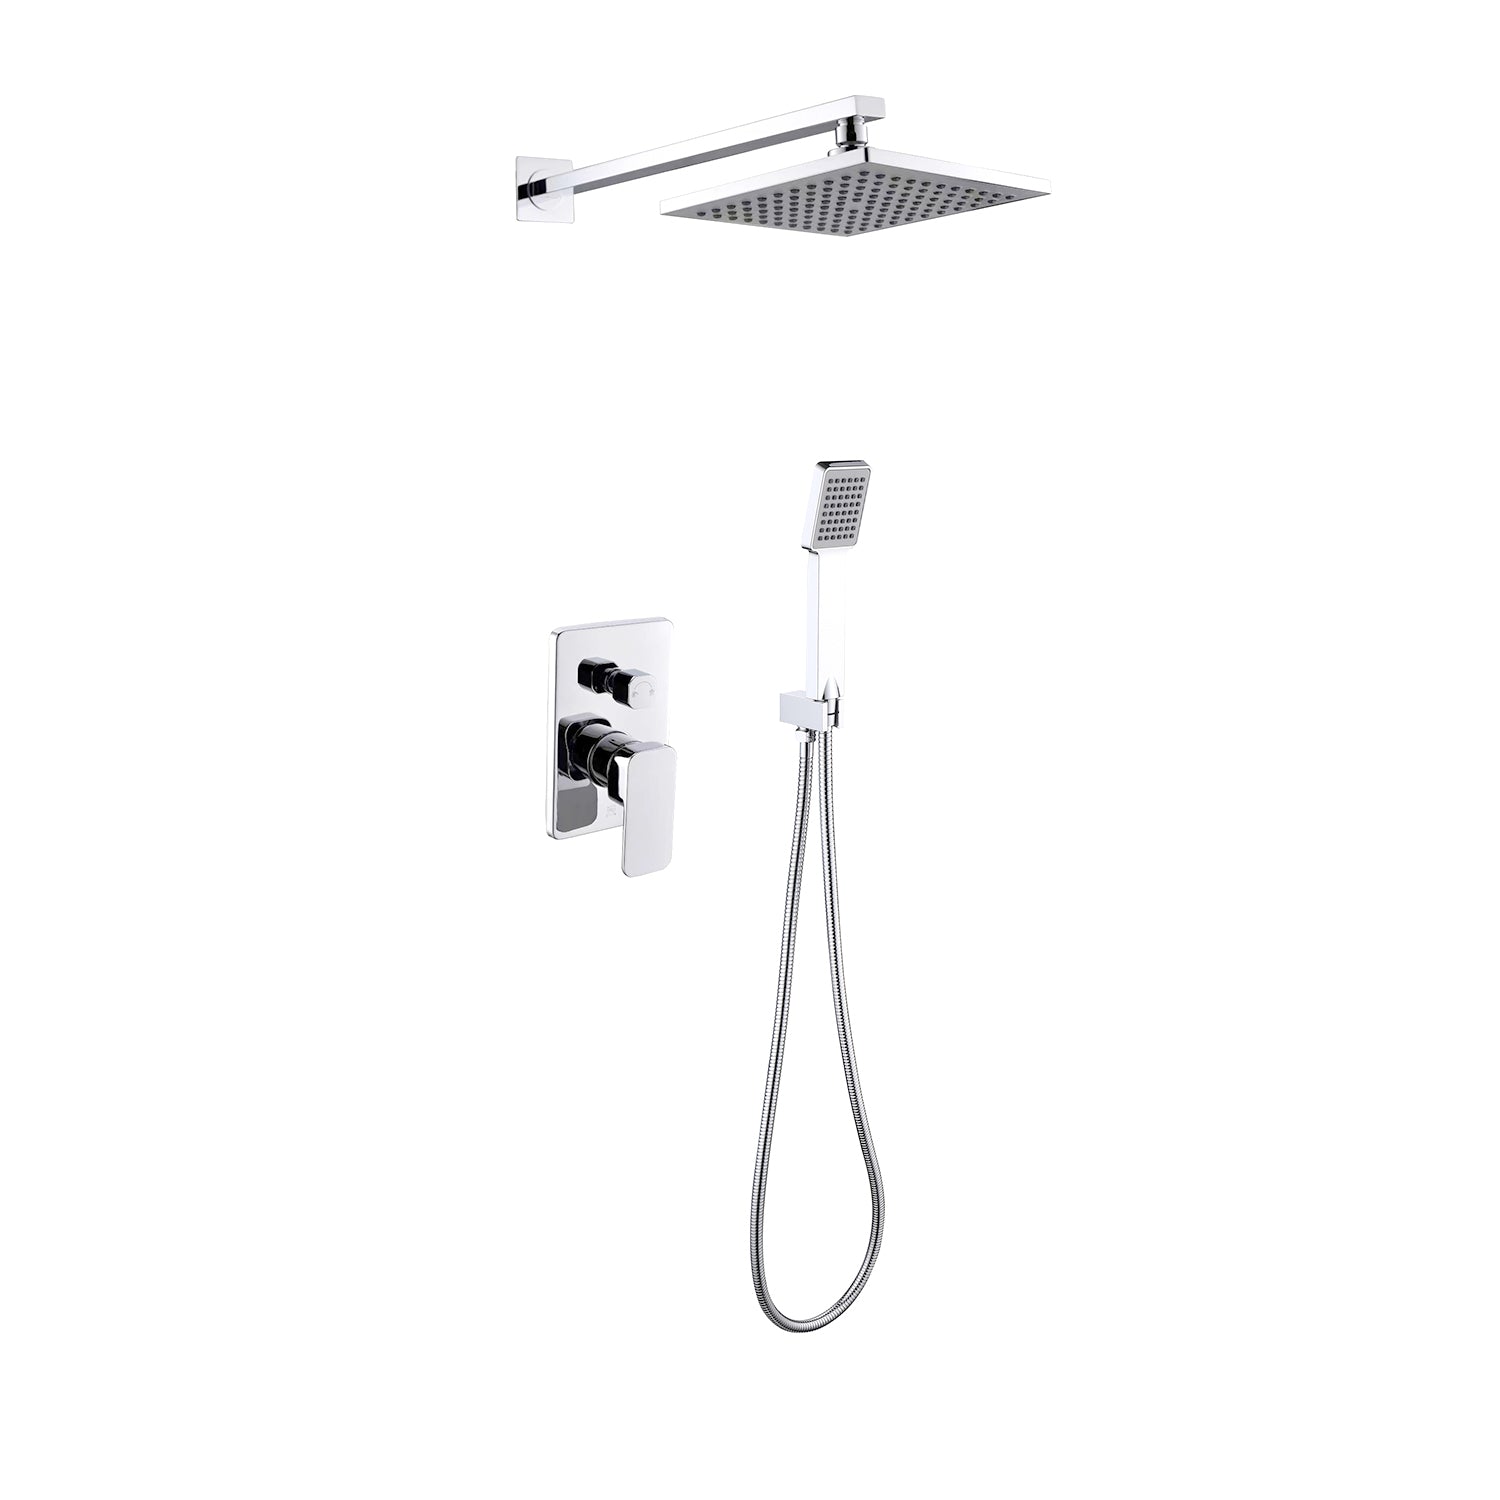 DAX Bathroom Rain Mixer Shower, Square Rainfall Shower Head System with Shower Trim and Hand Shower, Wall Mount, Chrome Finish (DAX-6813B-CR)